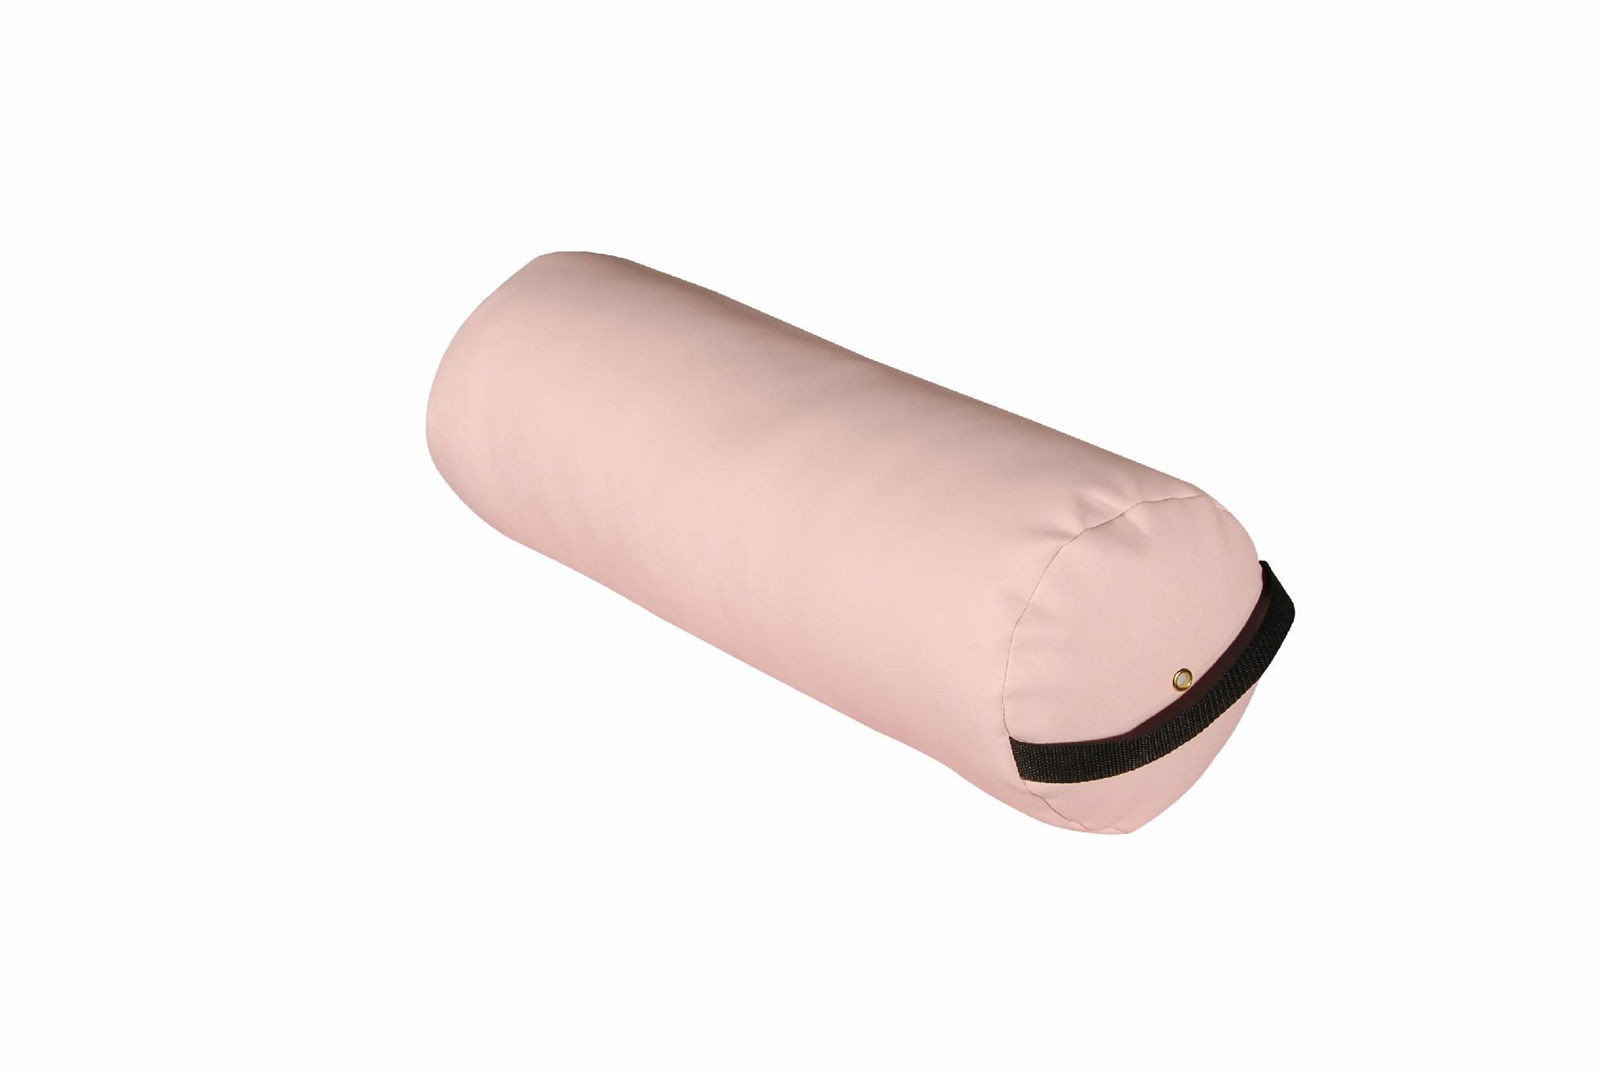  MB04 Cloud Soft Round Bolster